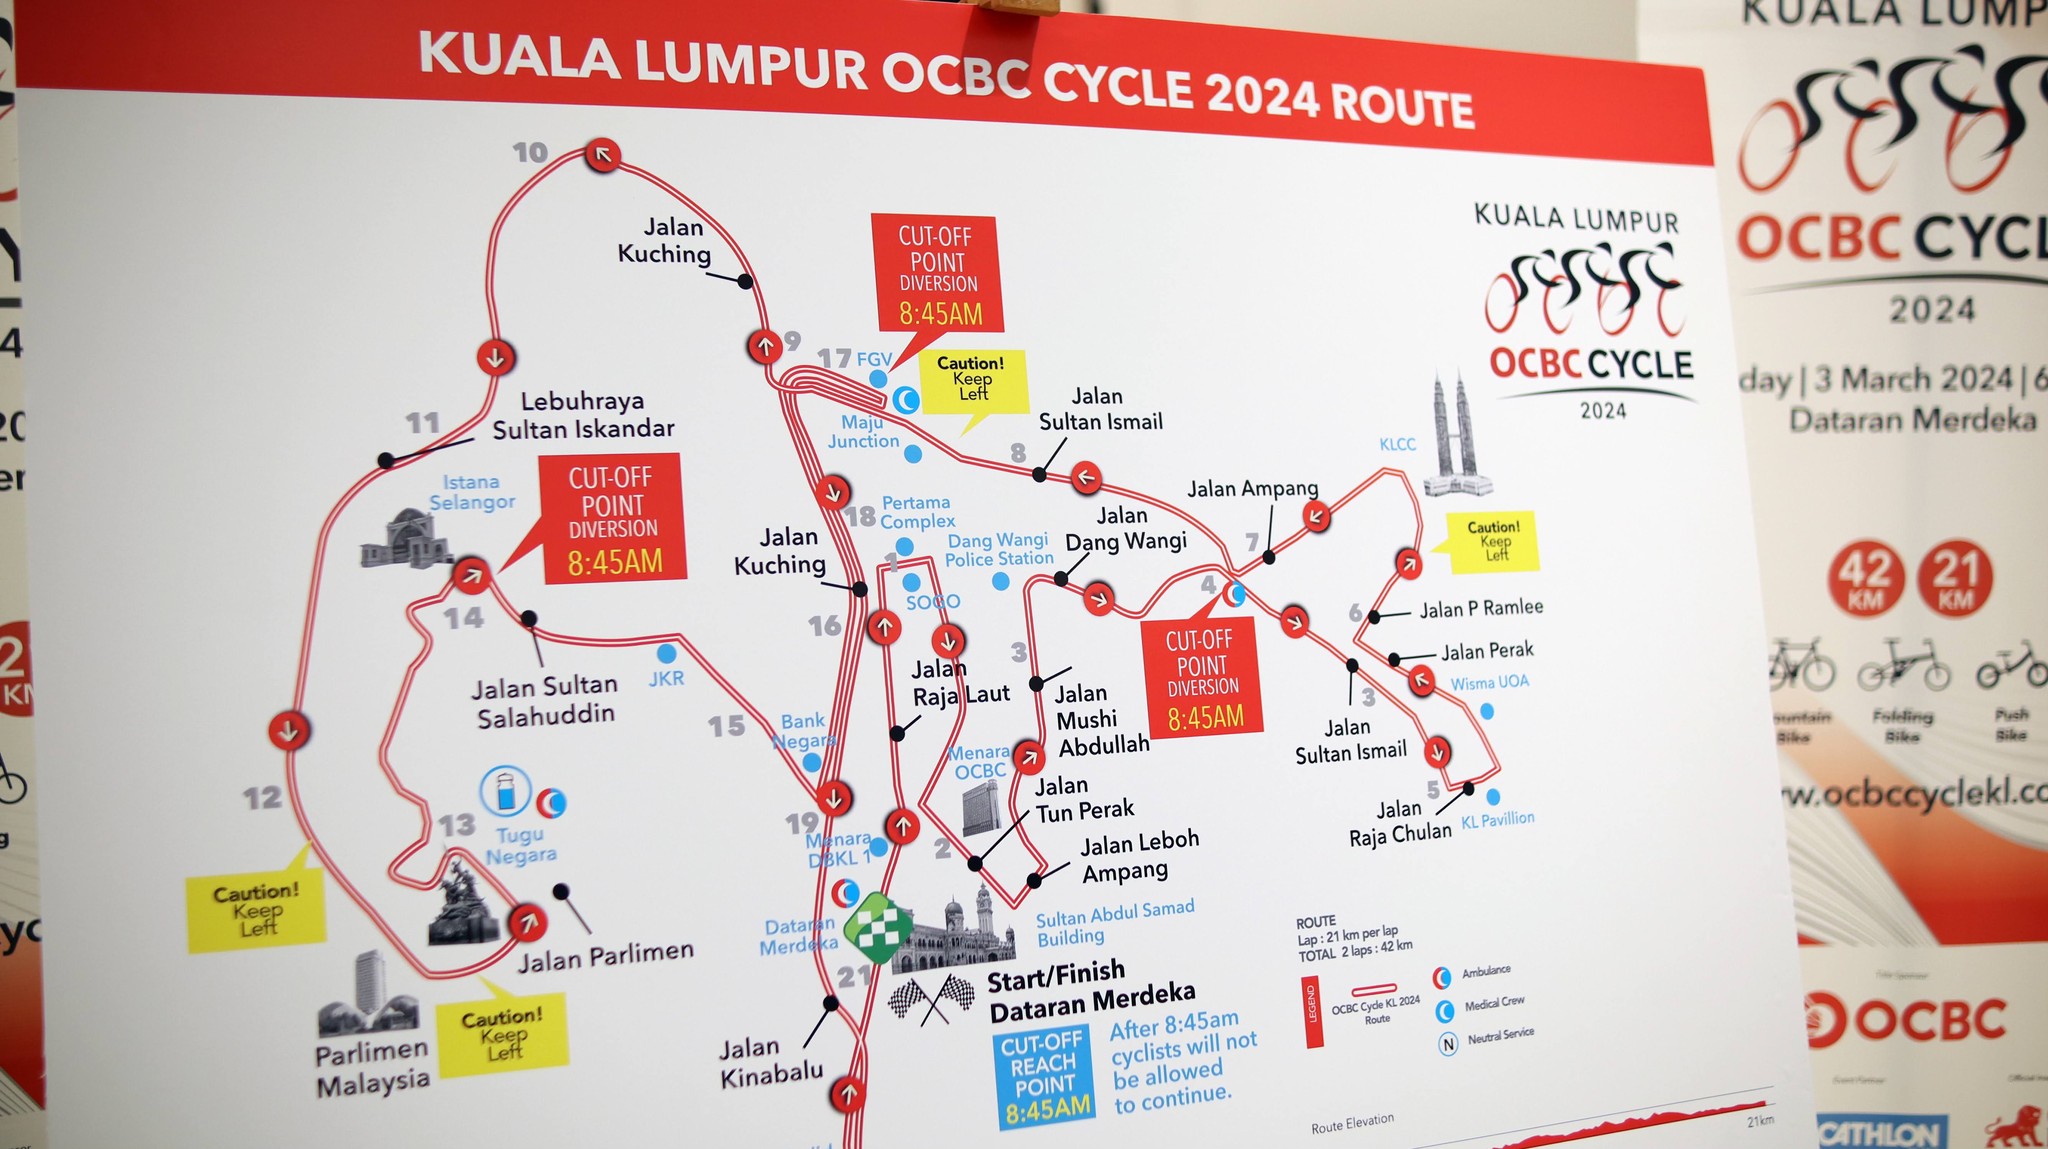 OCBC Cycle: 17 roads in KL city centre to be closed in stages on Sun